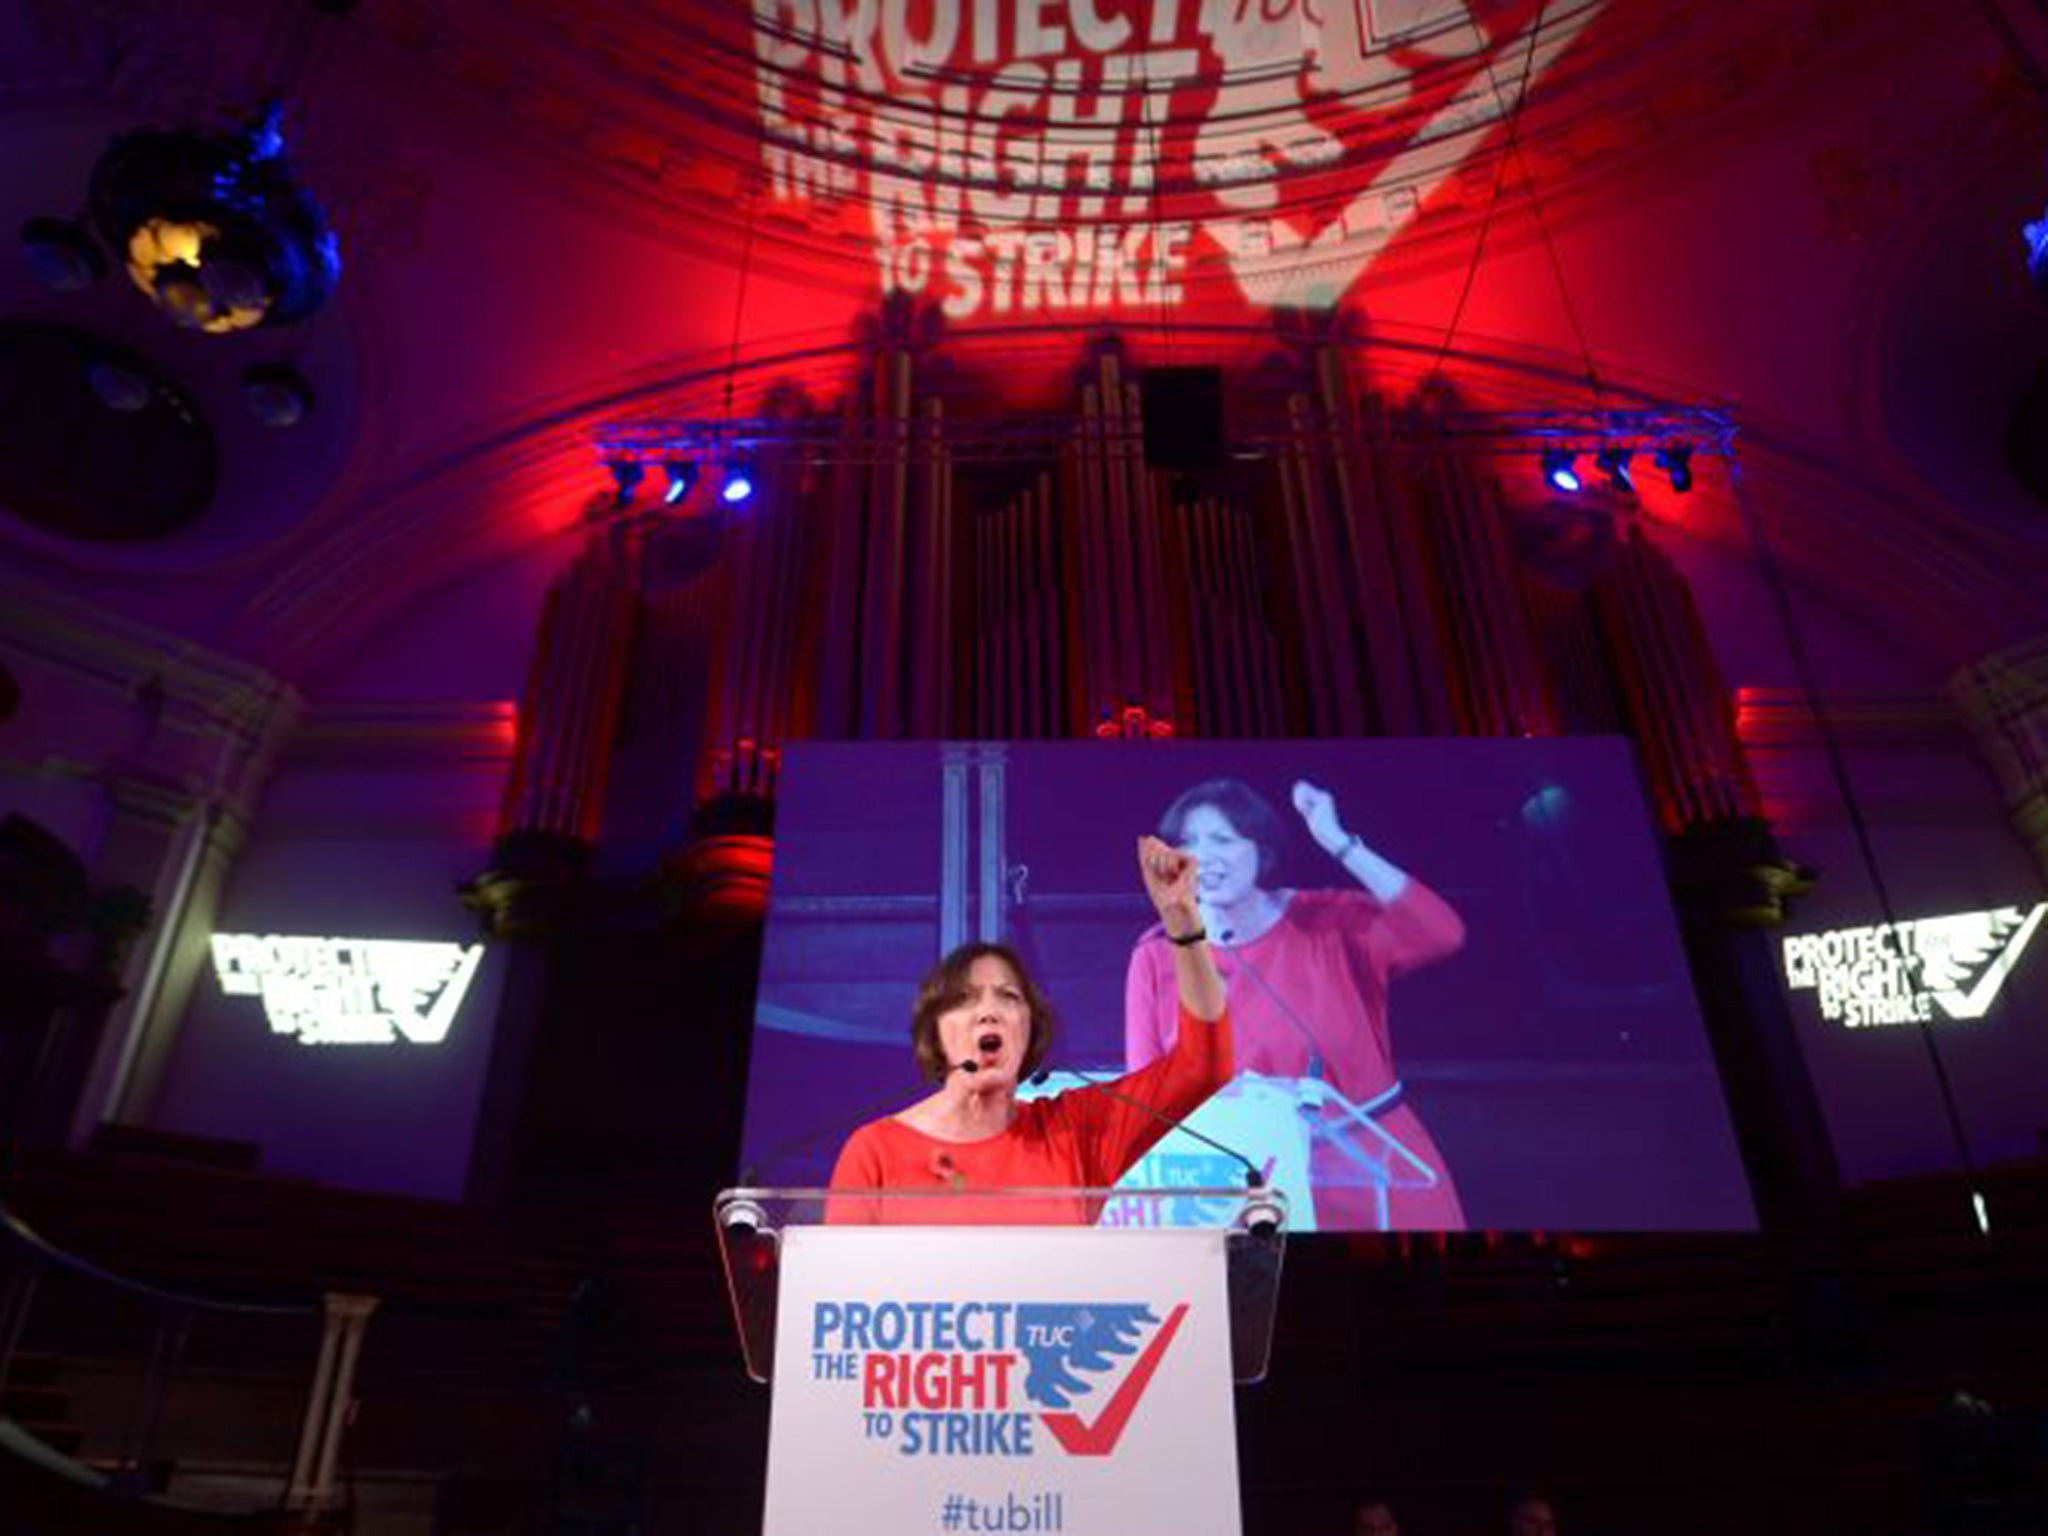 TUC general secretary Frances O'Grady gives the closing address during the TUC rally on 2 November